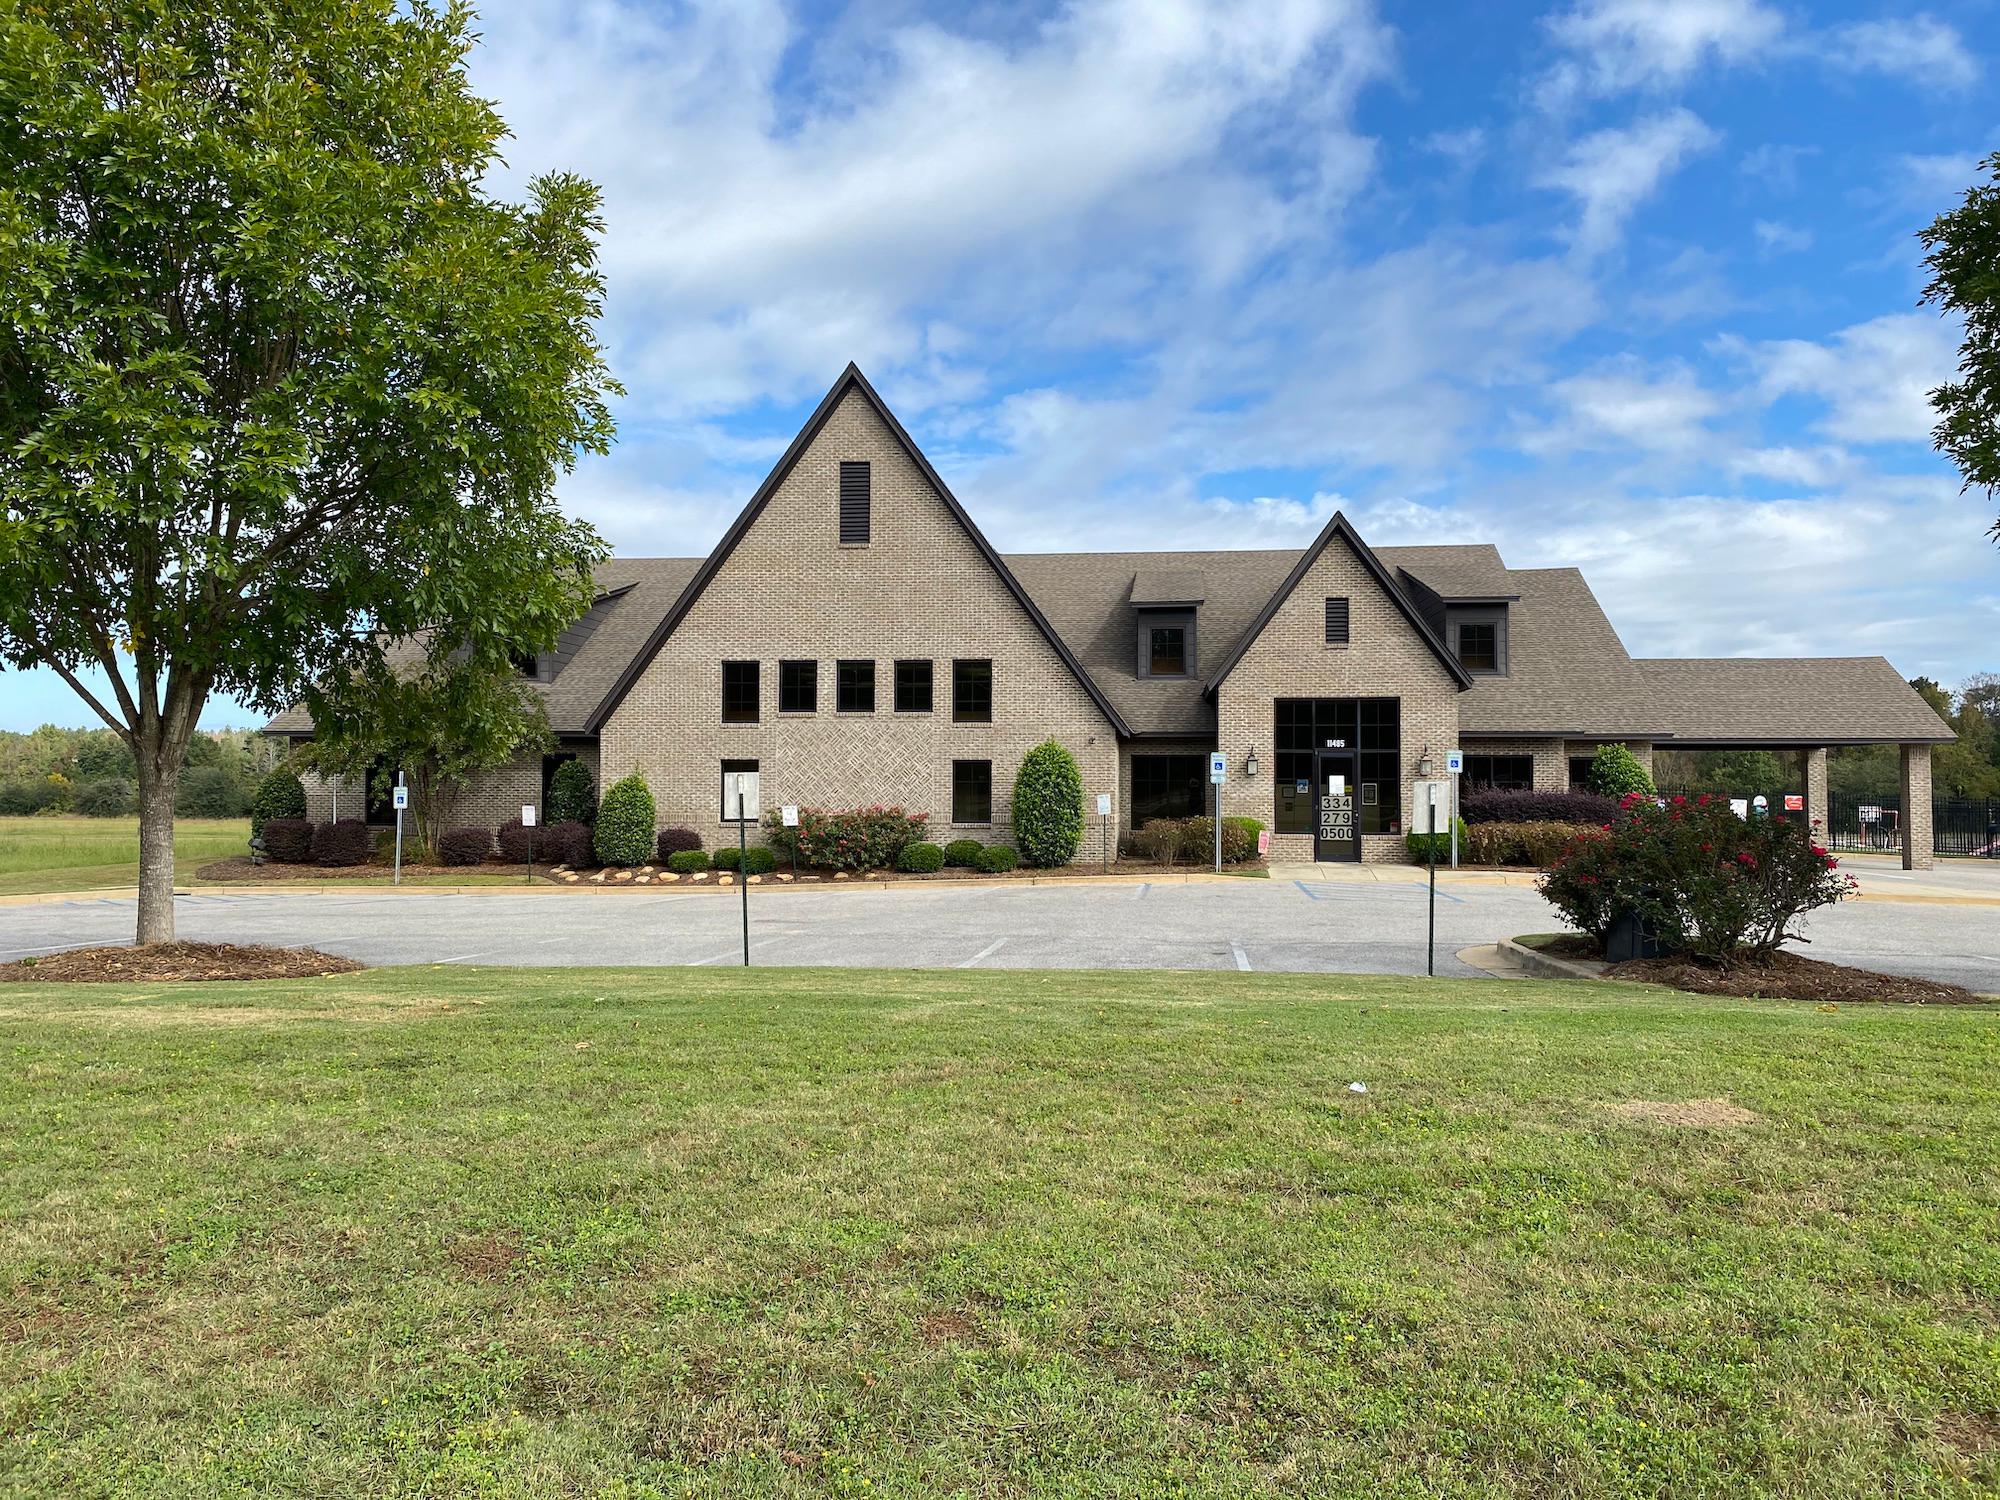 Goodwin Animal Hospital at Pike Road - Montgomery, AL 36064 - (334)279-0500 | ShowMeLocal.com